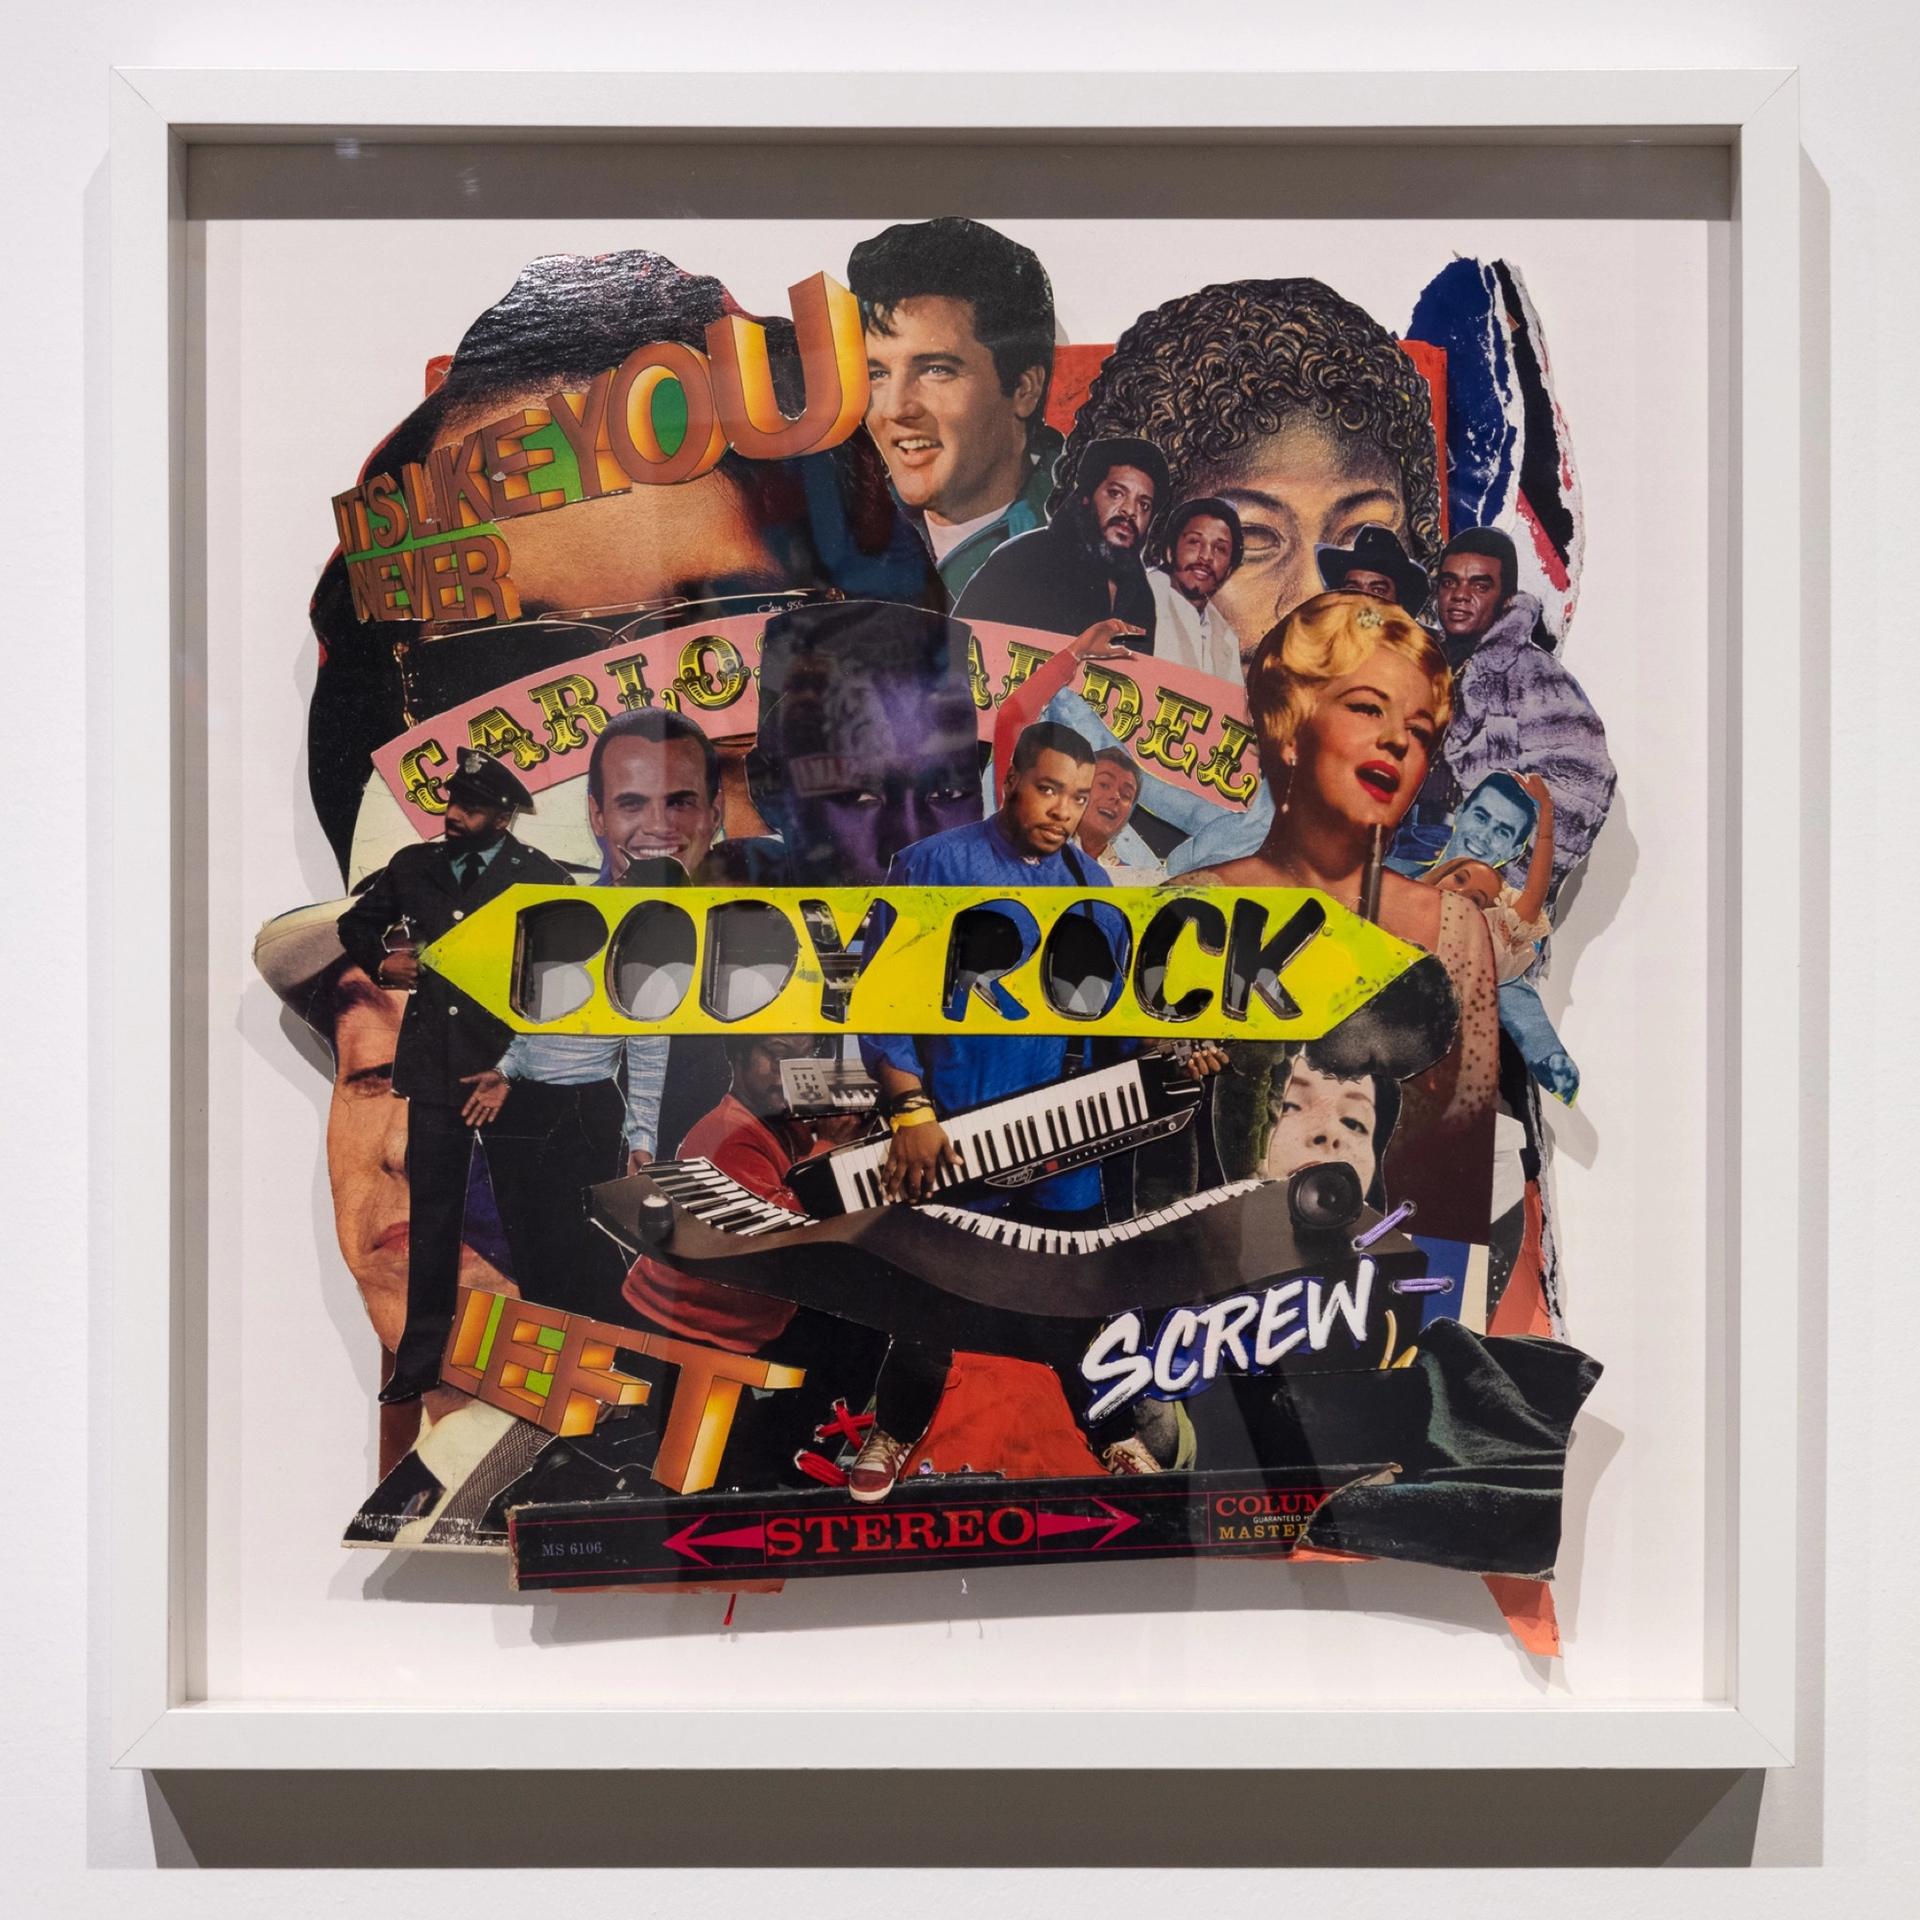 Mixed media collage by Robert Hodge, in "Slowed and Throwed: Records of the City Through Mutated Lenses." Photo: Emily Peacock, 2020; courtesy of the Contemporary Arts Museum Houston (CAMH)